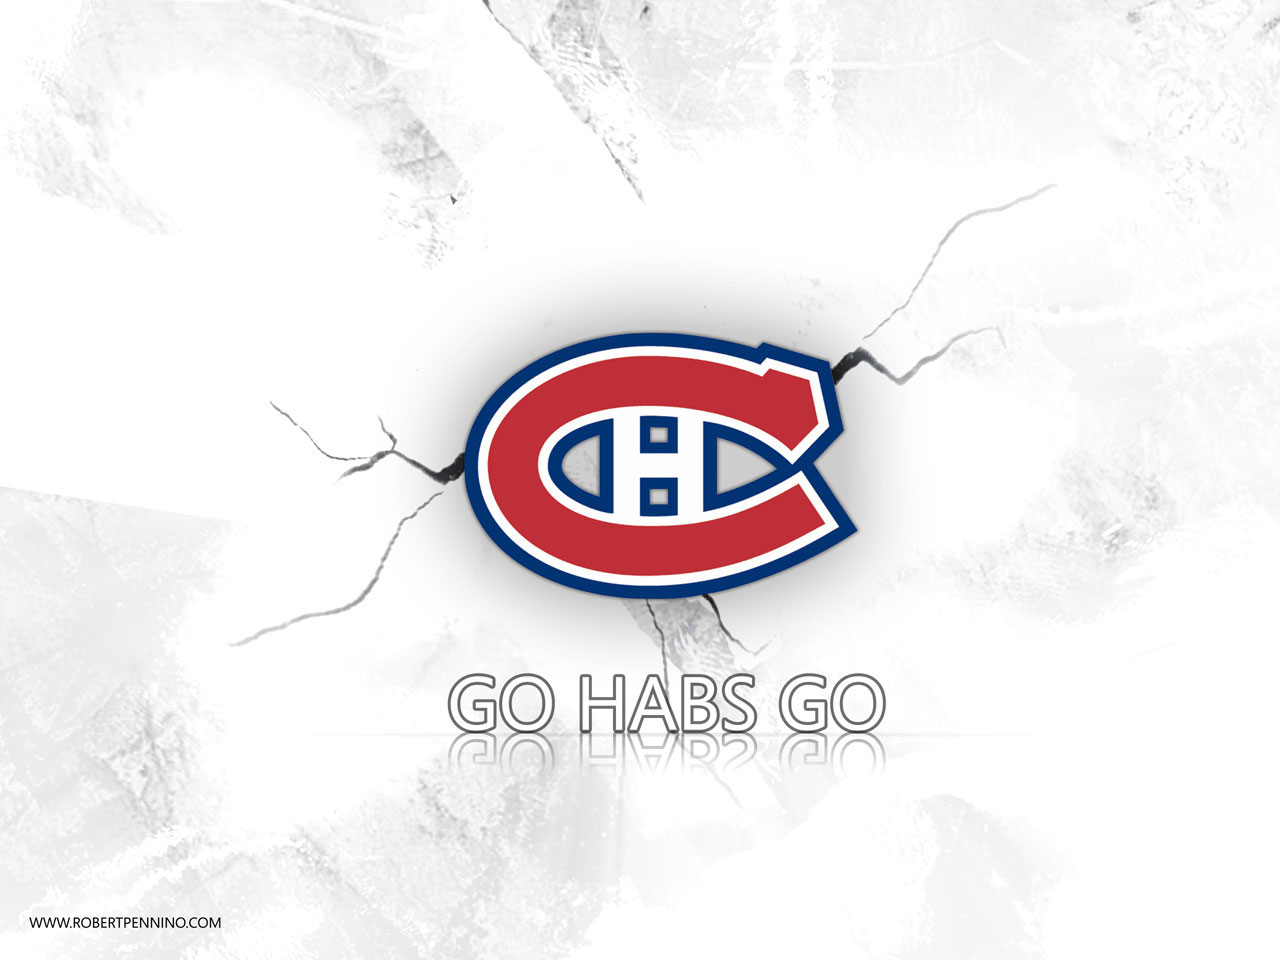 http://www.usageorge.com/Wallpapers/Sports/Wallpaper/Montreal-Canadiens.jpg